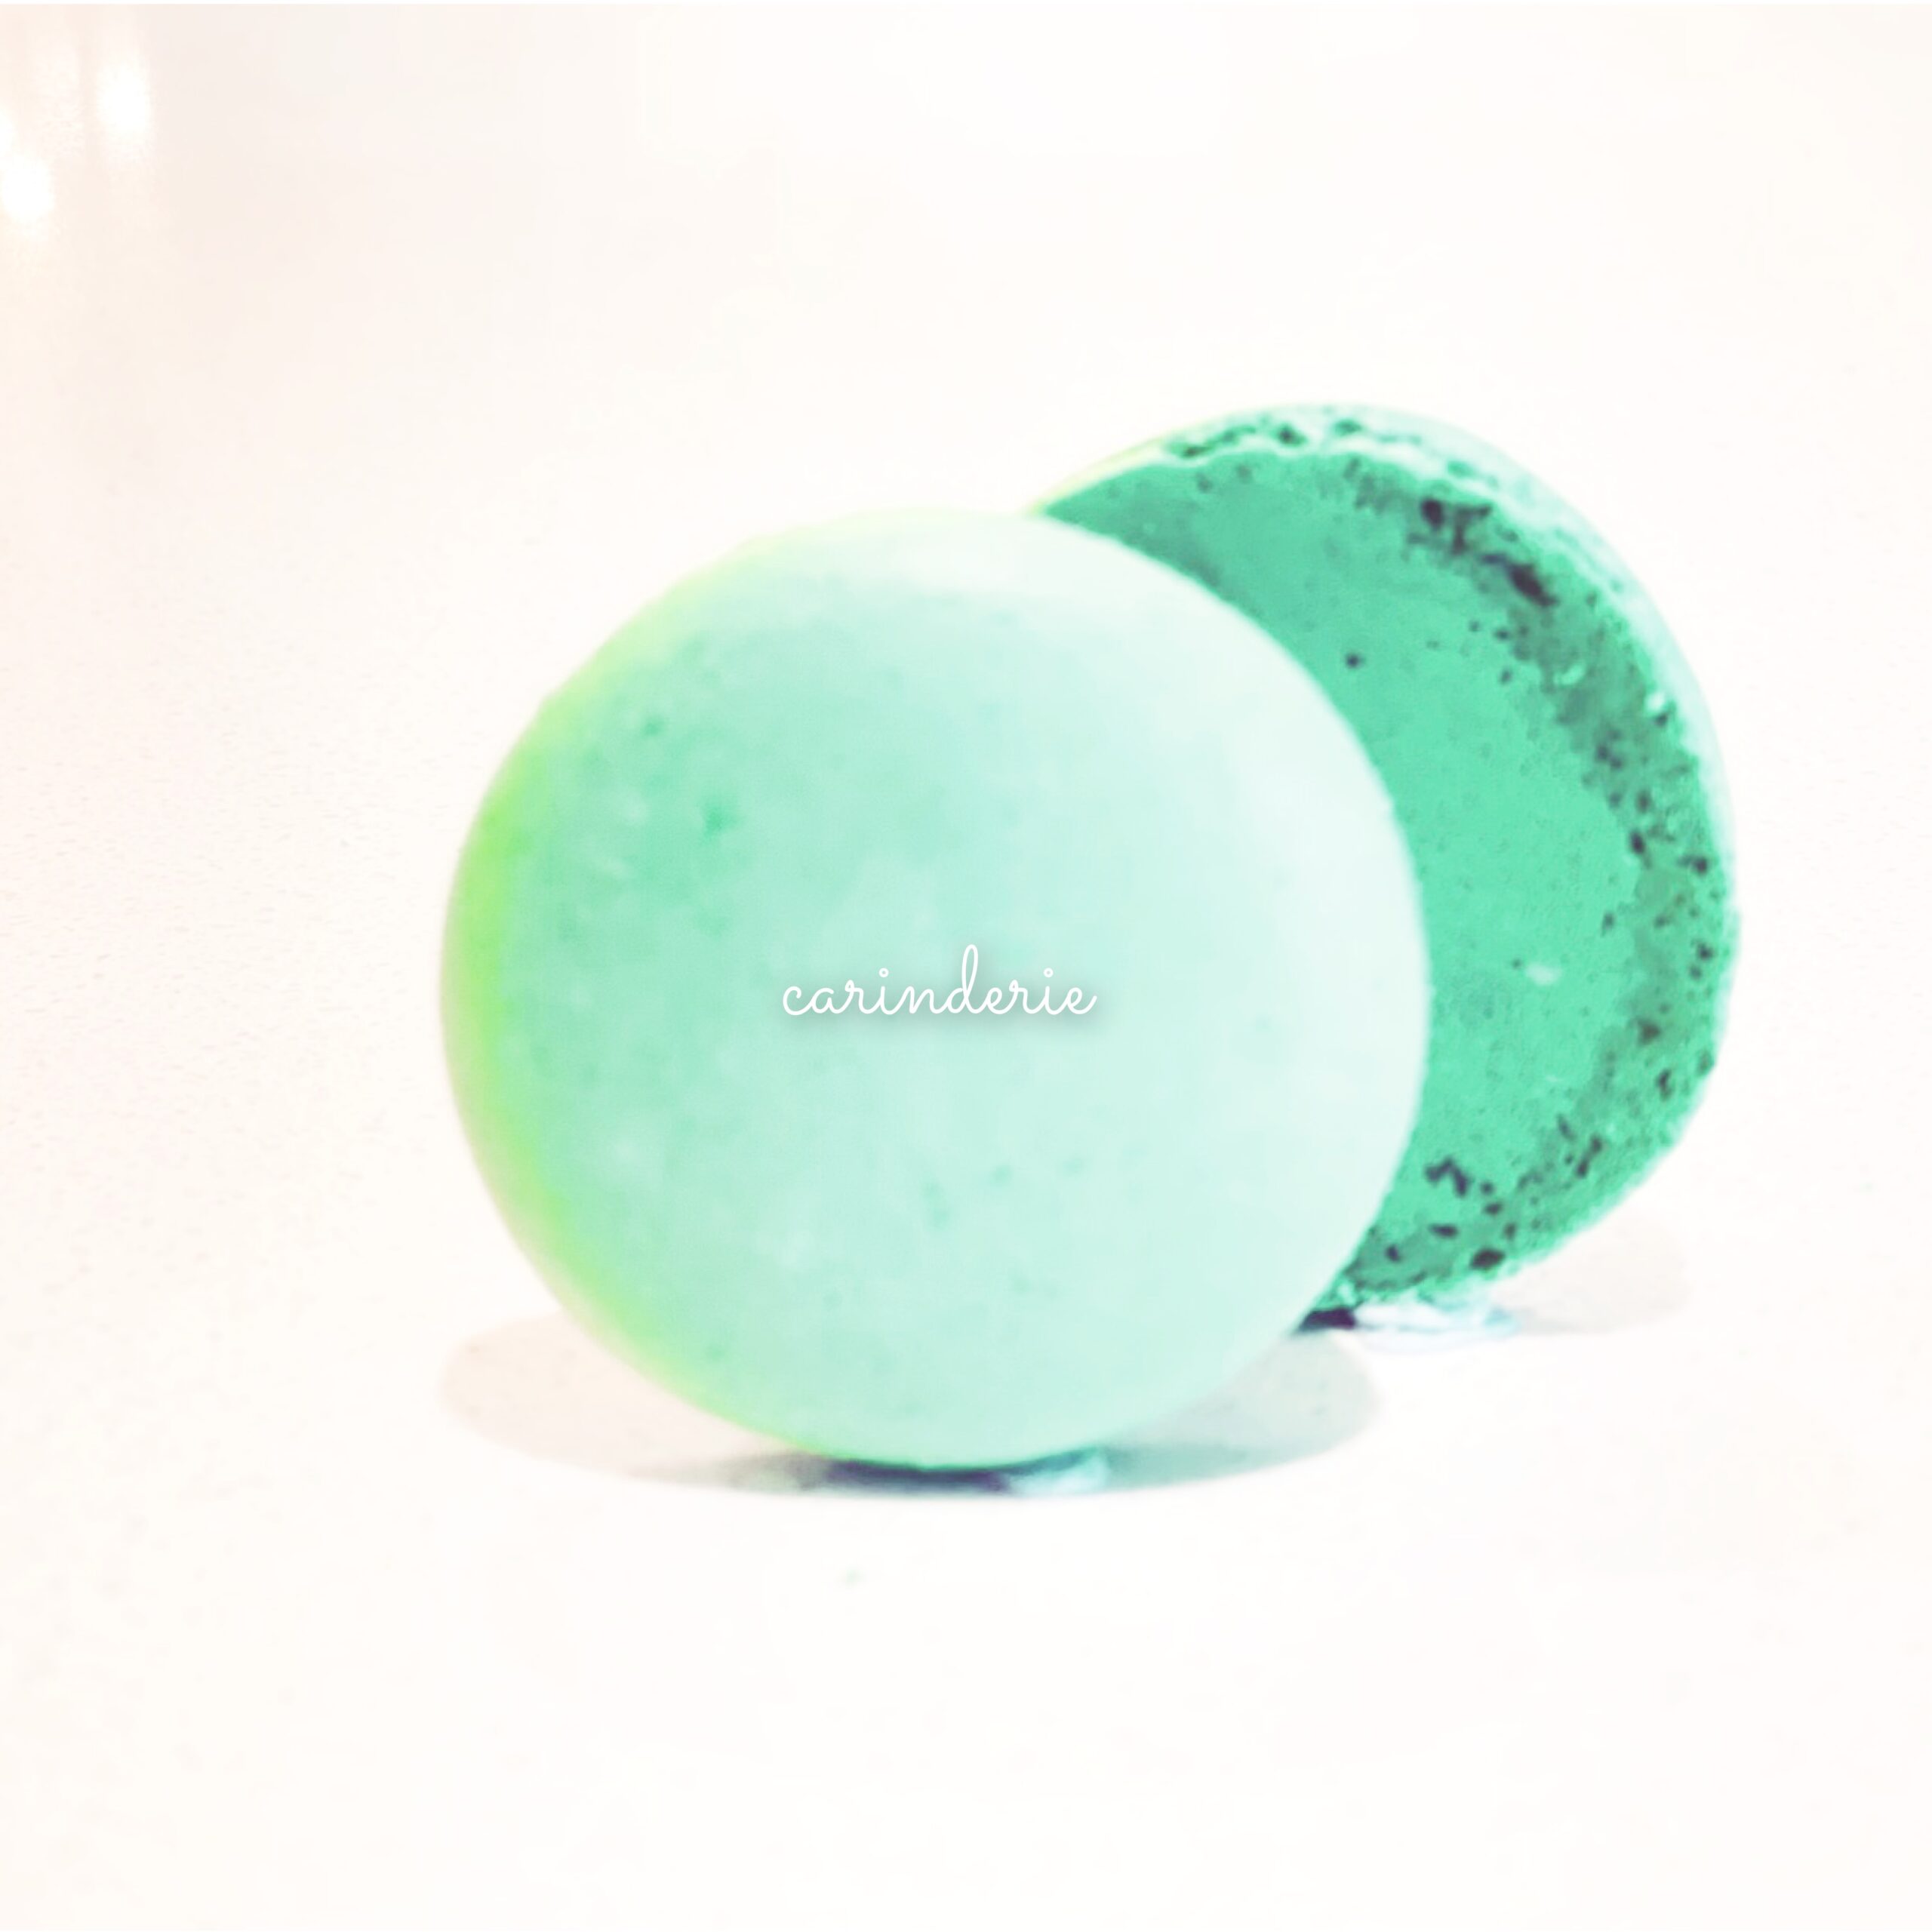 Mini Macaron Stand Bomboniere – from $4.5 (min order of 12 applies ...